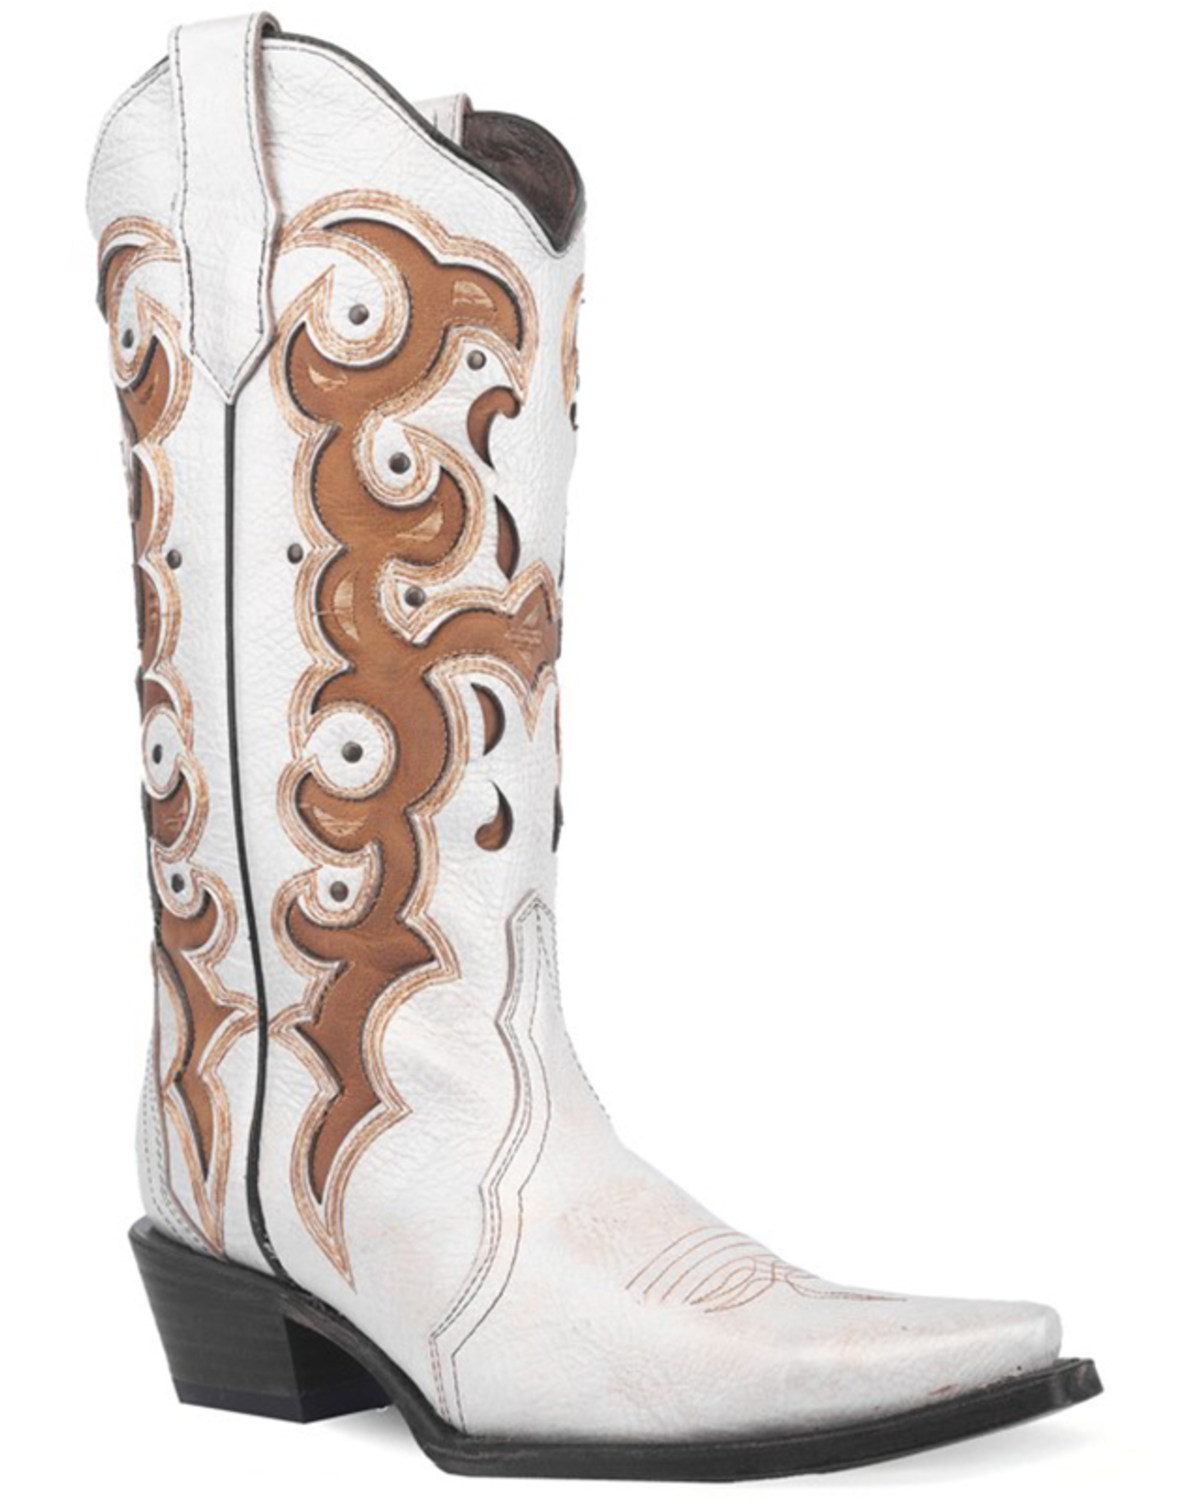 Corral Women's Inlay Western Boots - Snip Toe